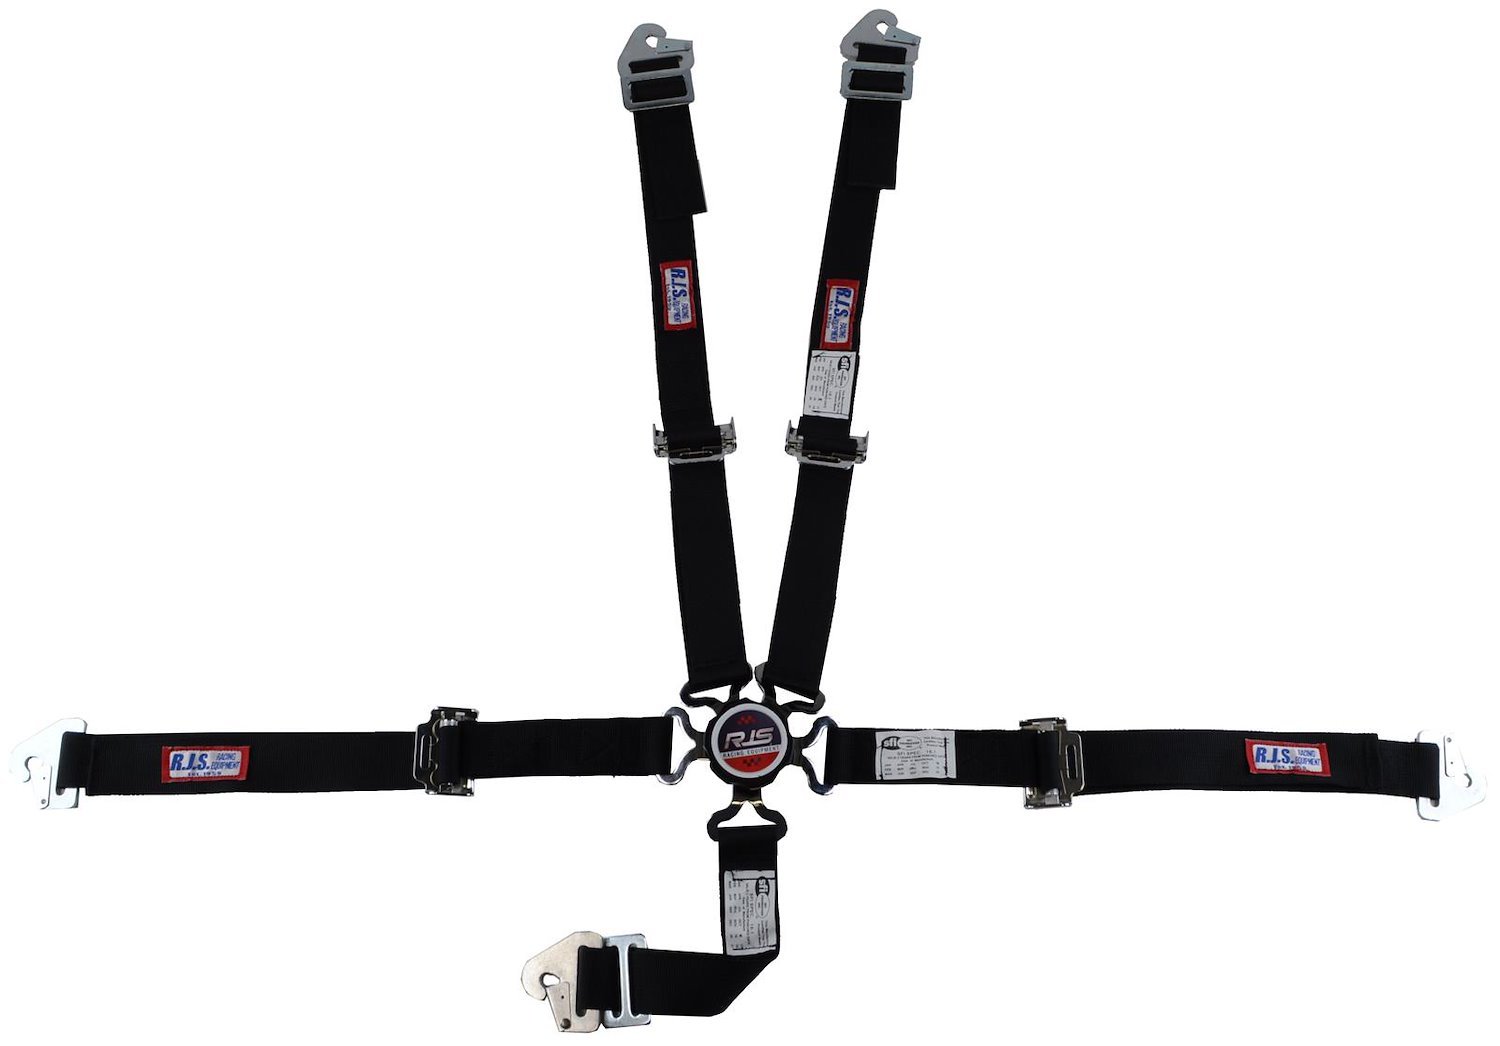 SFI 16.1 CAM-LOCK HARNESS 2 PULL UP Lap Belt 2 Shoulder Harness Individual FLOOR Mount 2 SINGLE Sub ALL WRAP ENDS HOT PINK